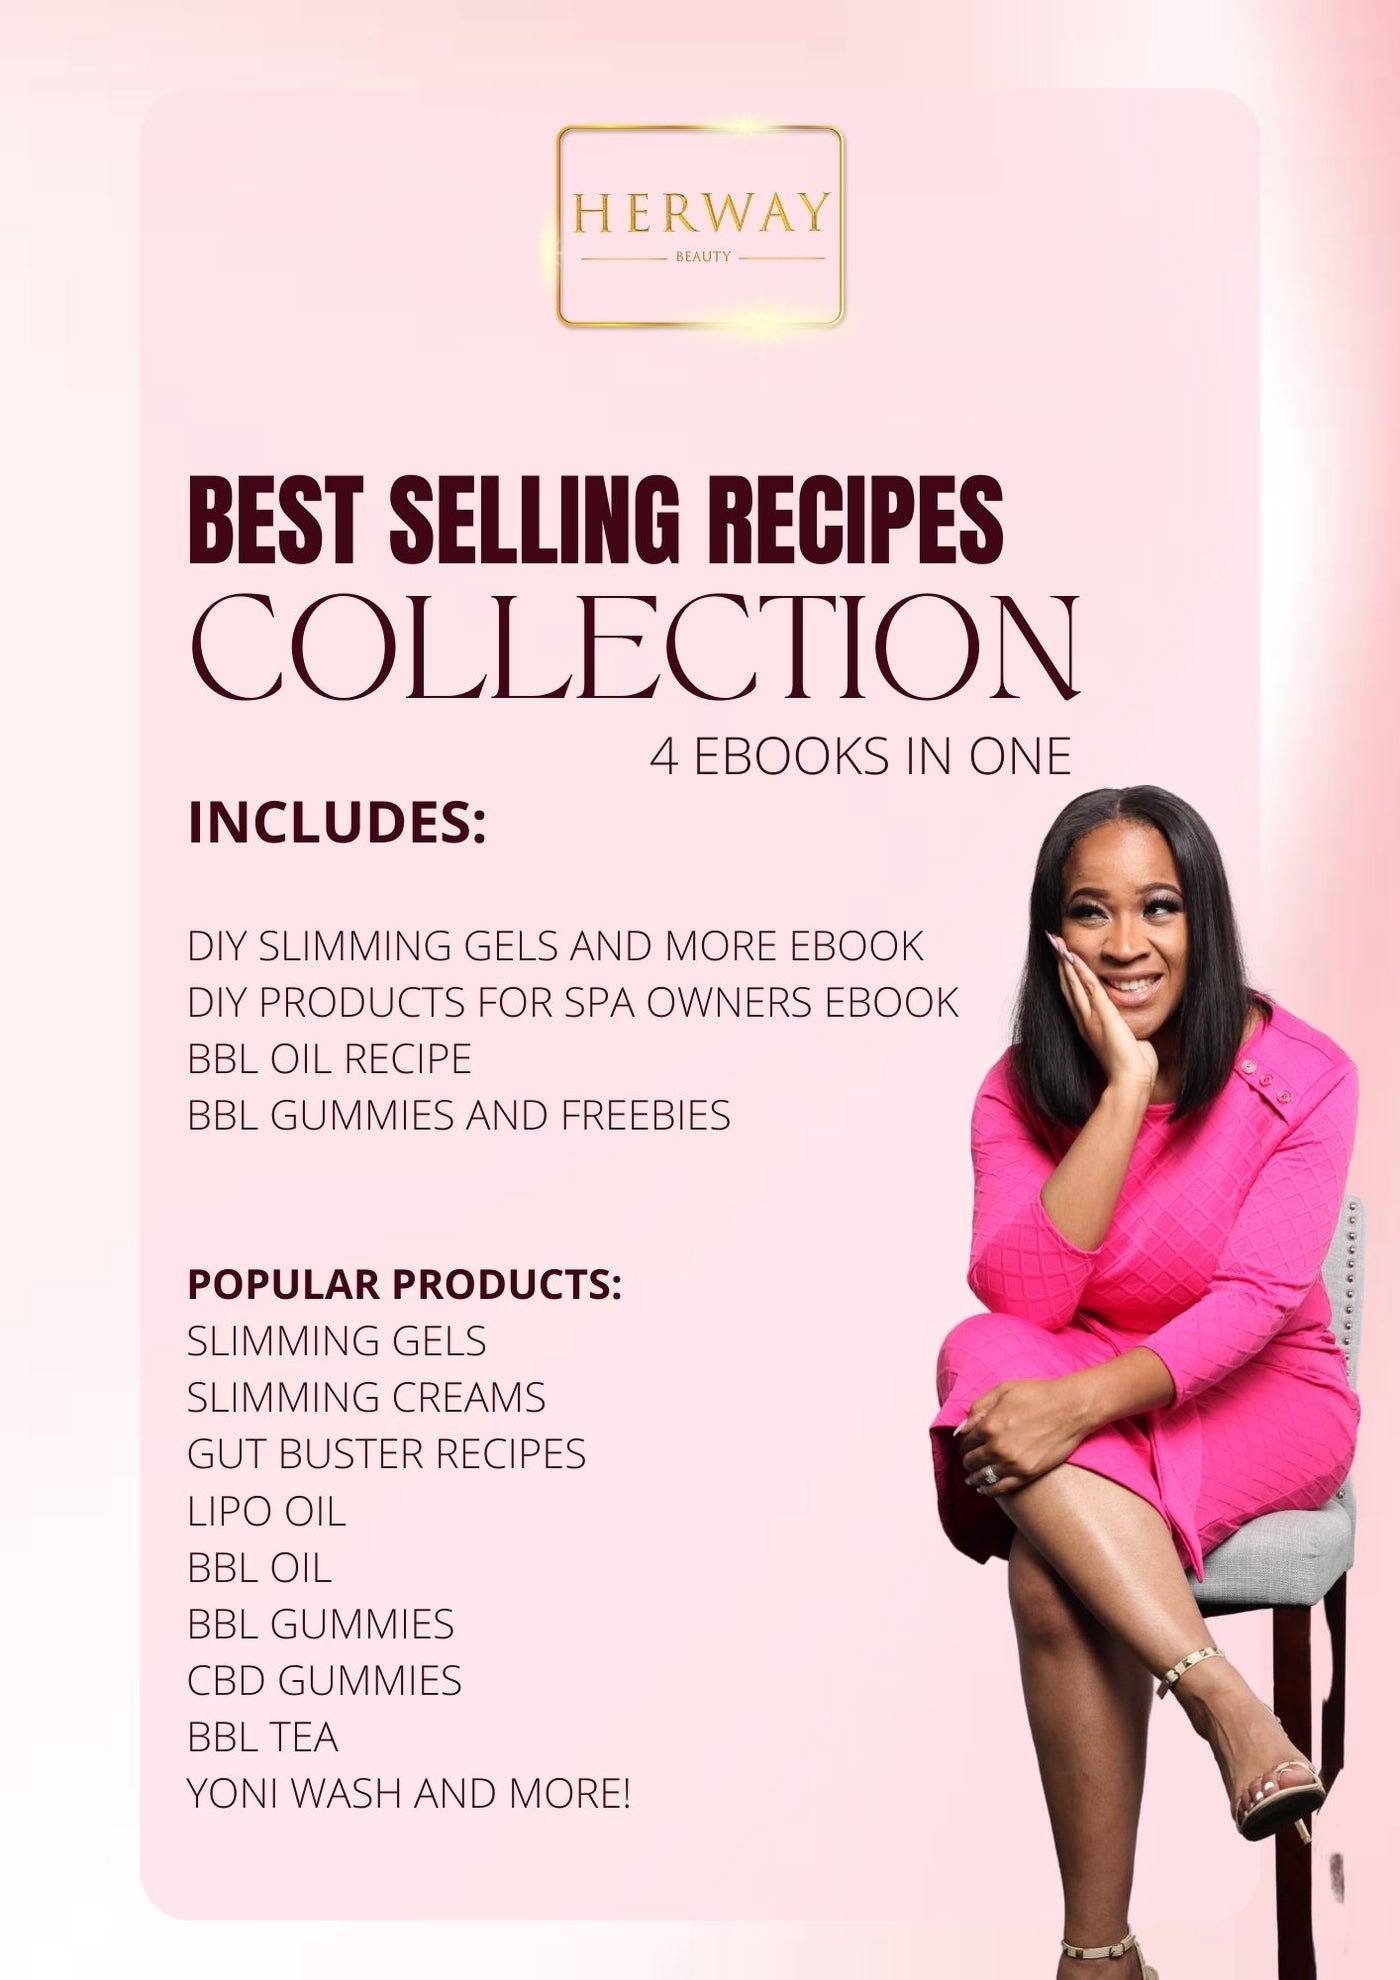 BEST SELLING RECIPES COLLECTION